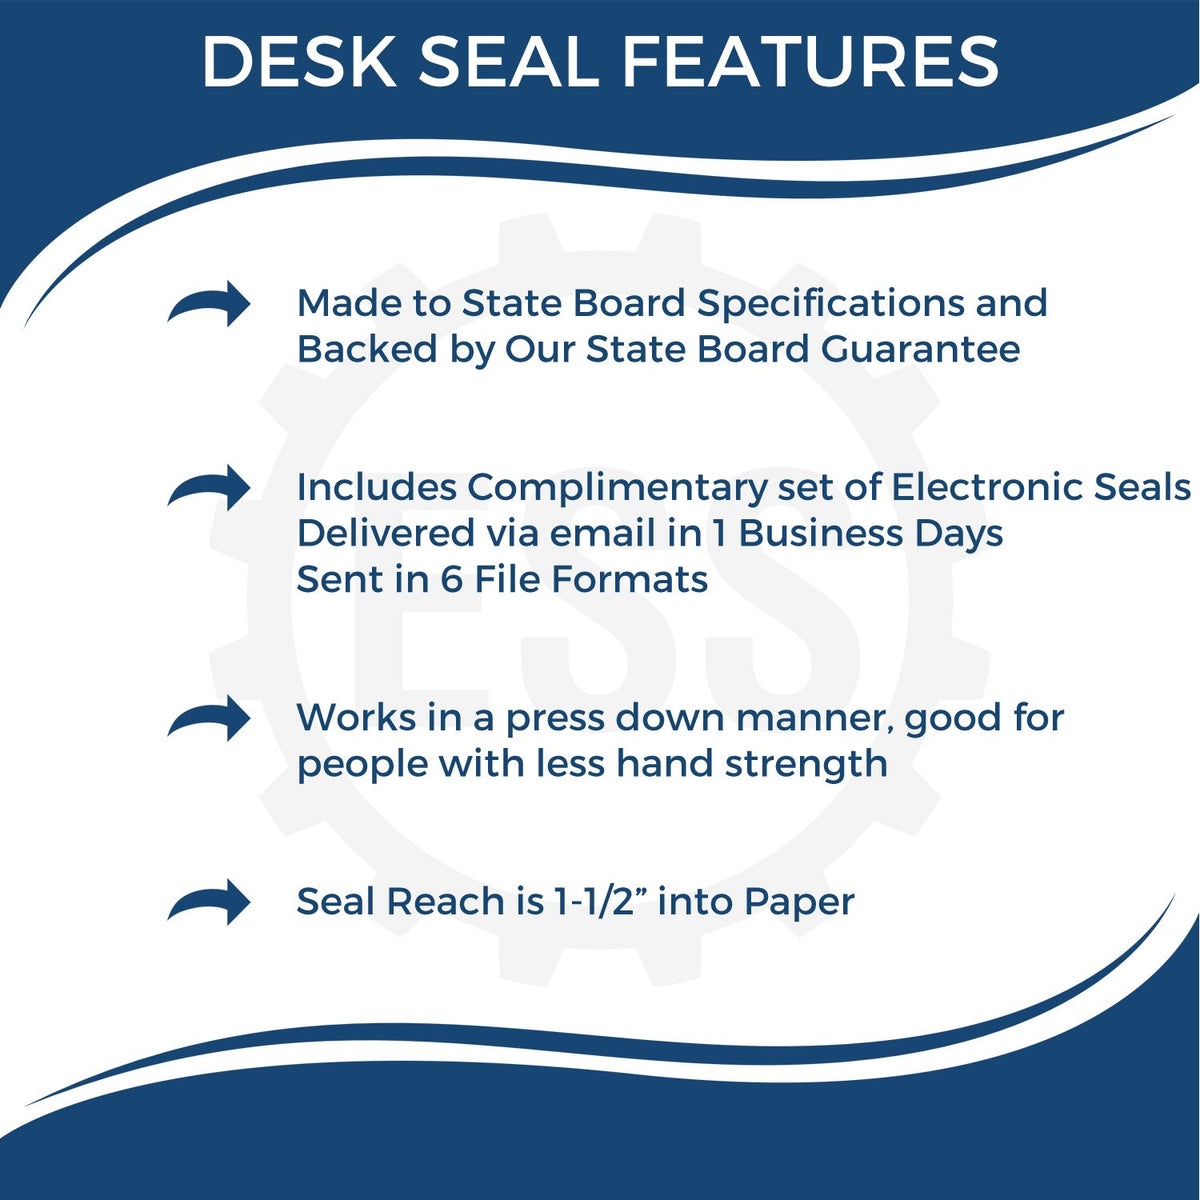 A picture of an infographic highlighting the selling points for the Mississippi Desk Surveyor Seal Embosser